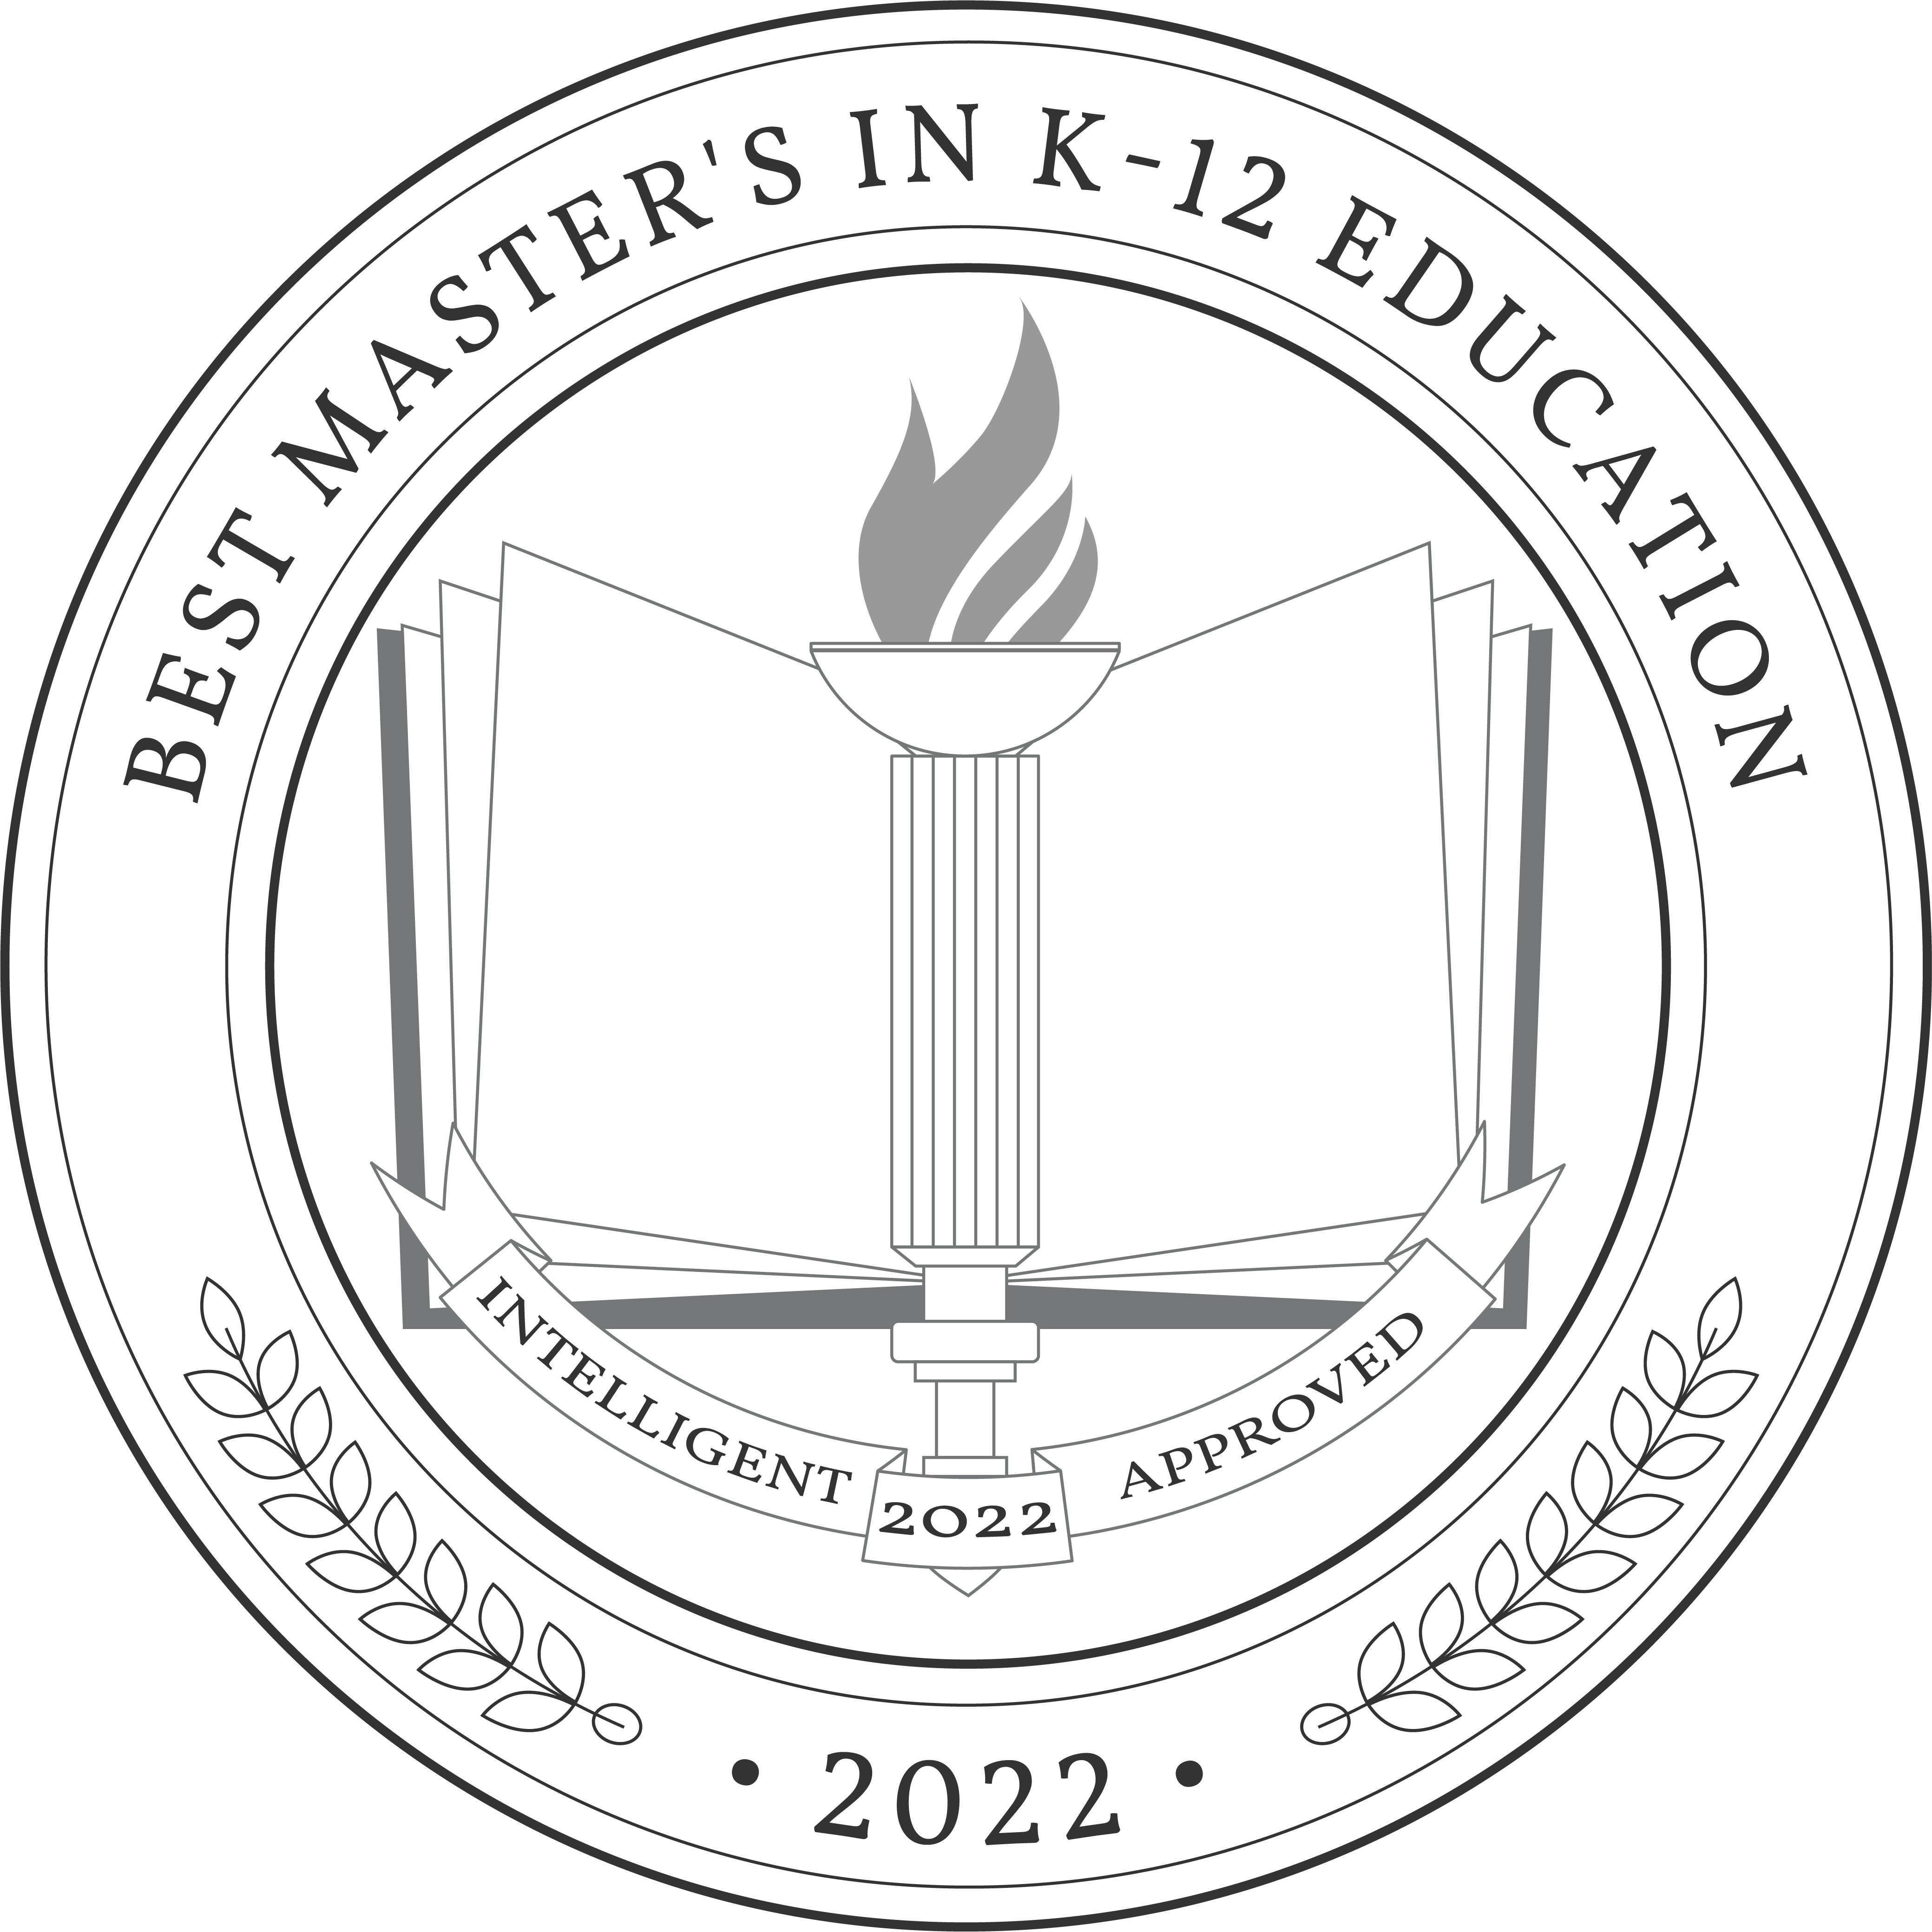 Best-Masters-in-K-12-Education-Badge-1.png